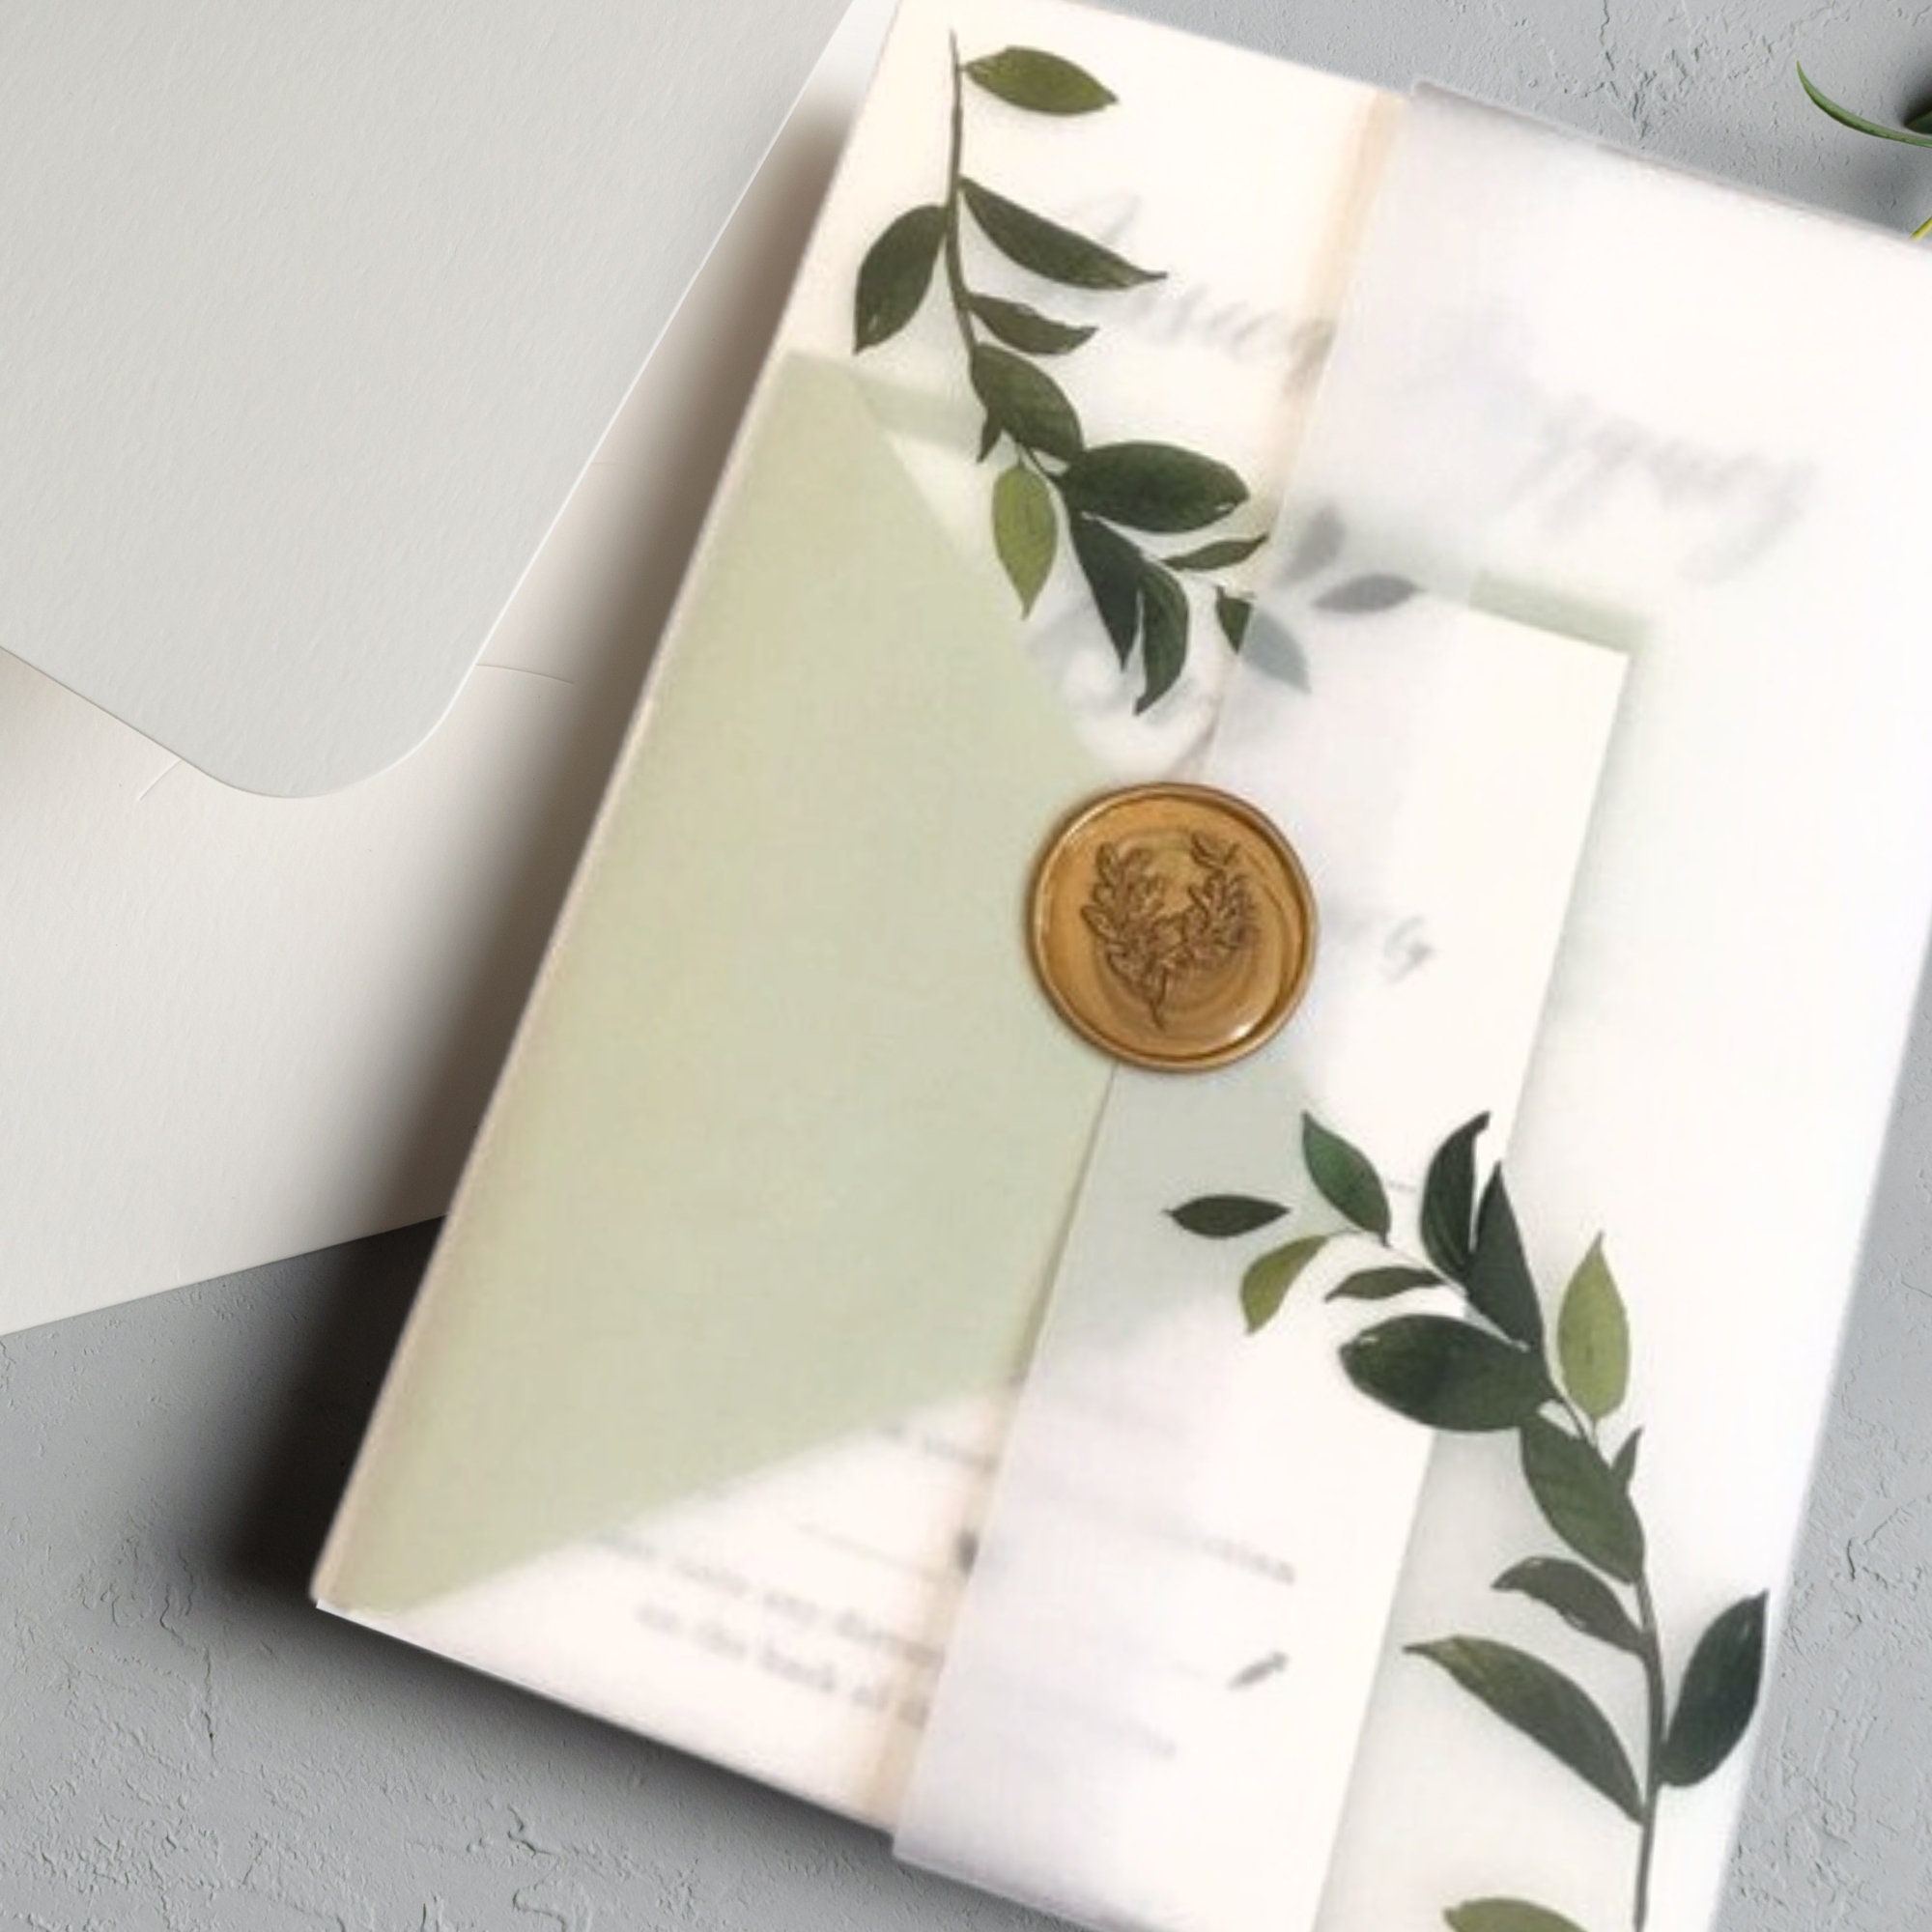  Luxury Gold Foil Floral Vellum Paper with seal, Pre-Folded Vellum  Jackets for 5x7 Invitations, Wedding Invitations Wrap Liners for DIY Photos  Postcards Scrapbook. : Handmade Products